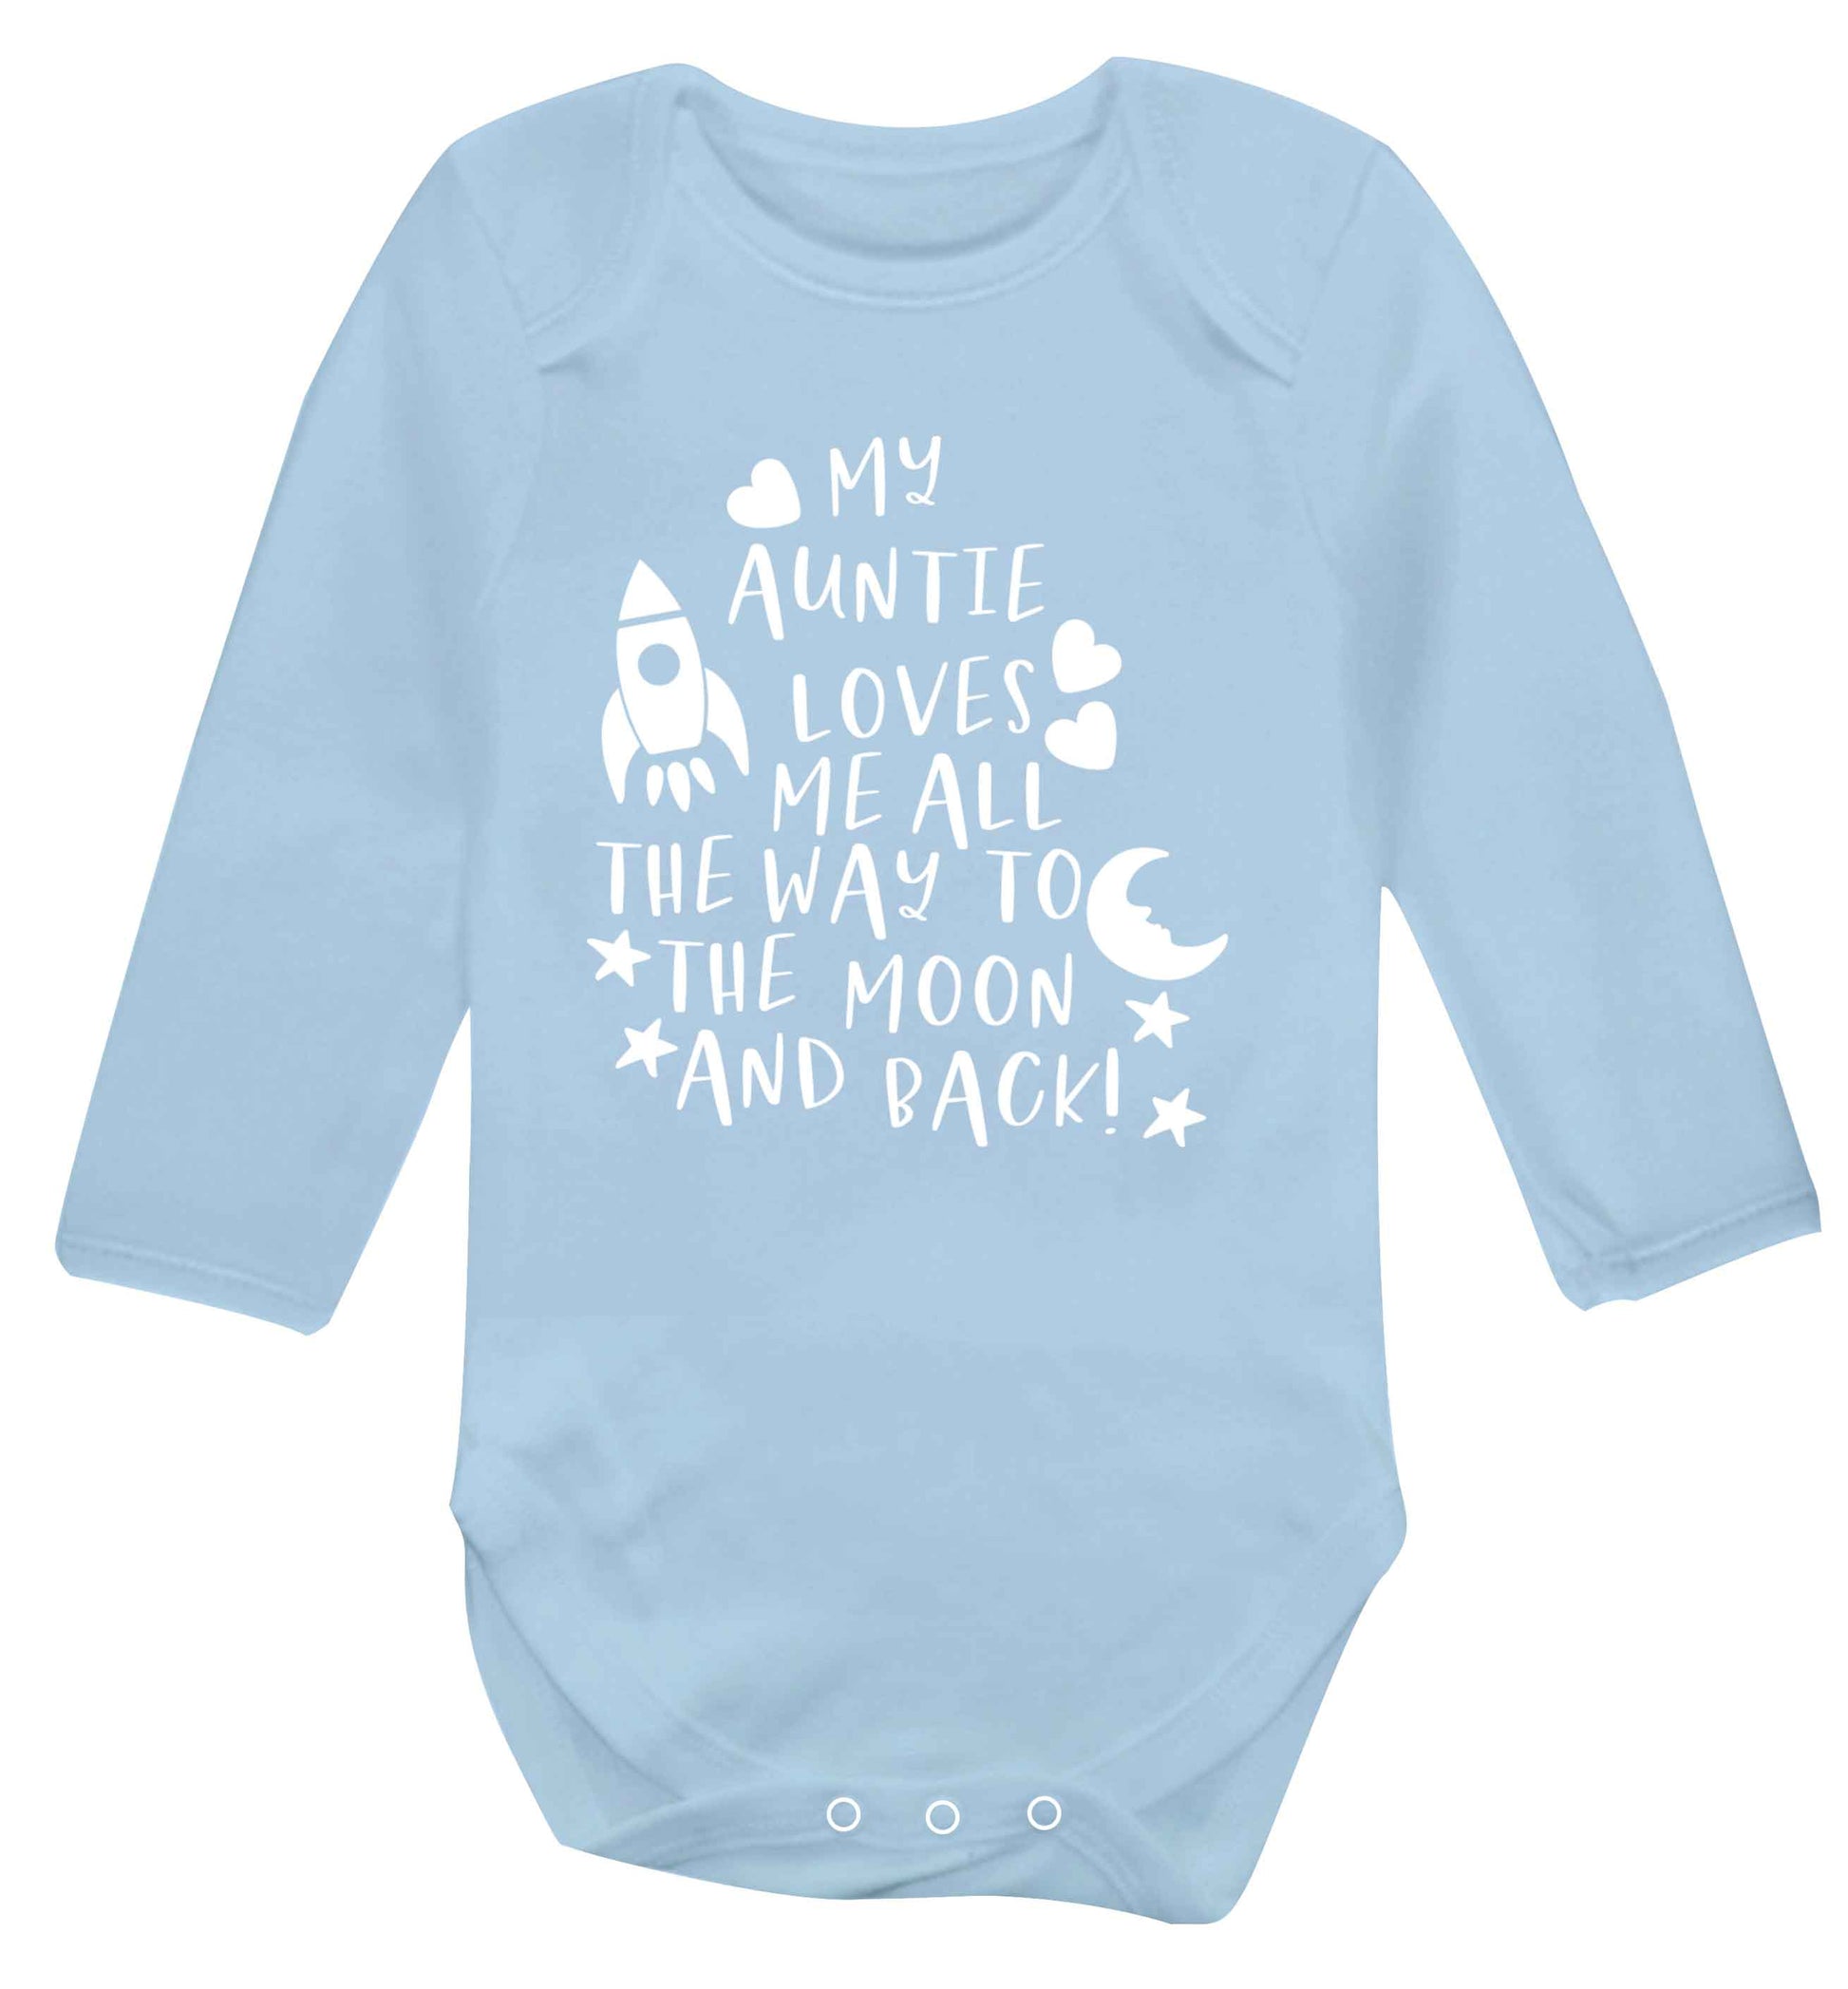 My auntie loves me all the way to the moon and back Baby Vest long sleeved pale blue 6-12 months